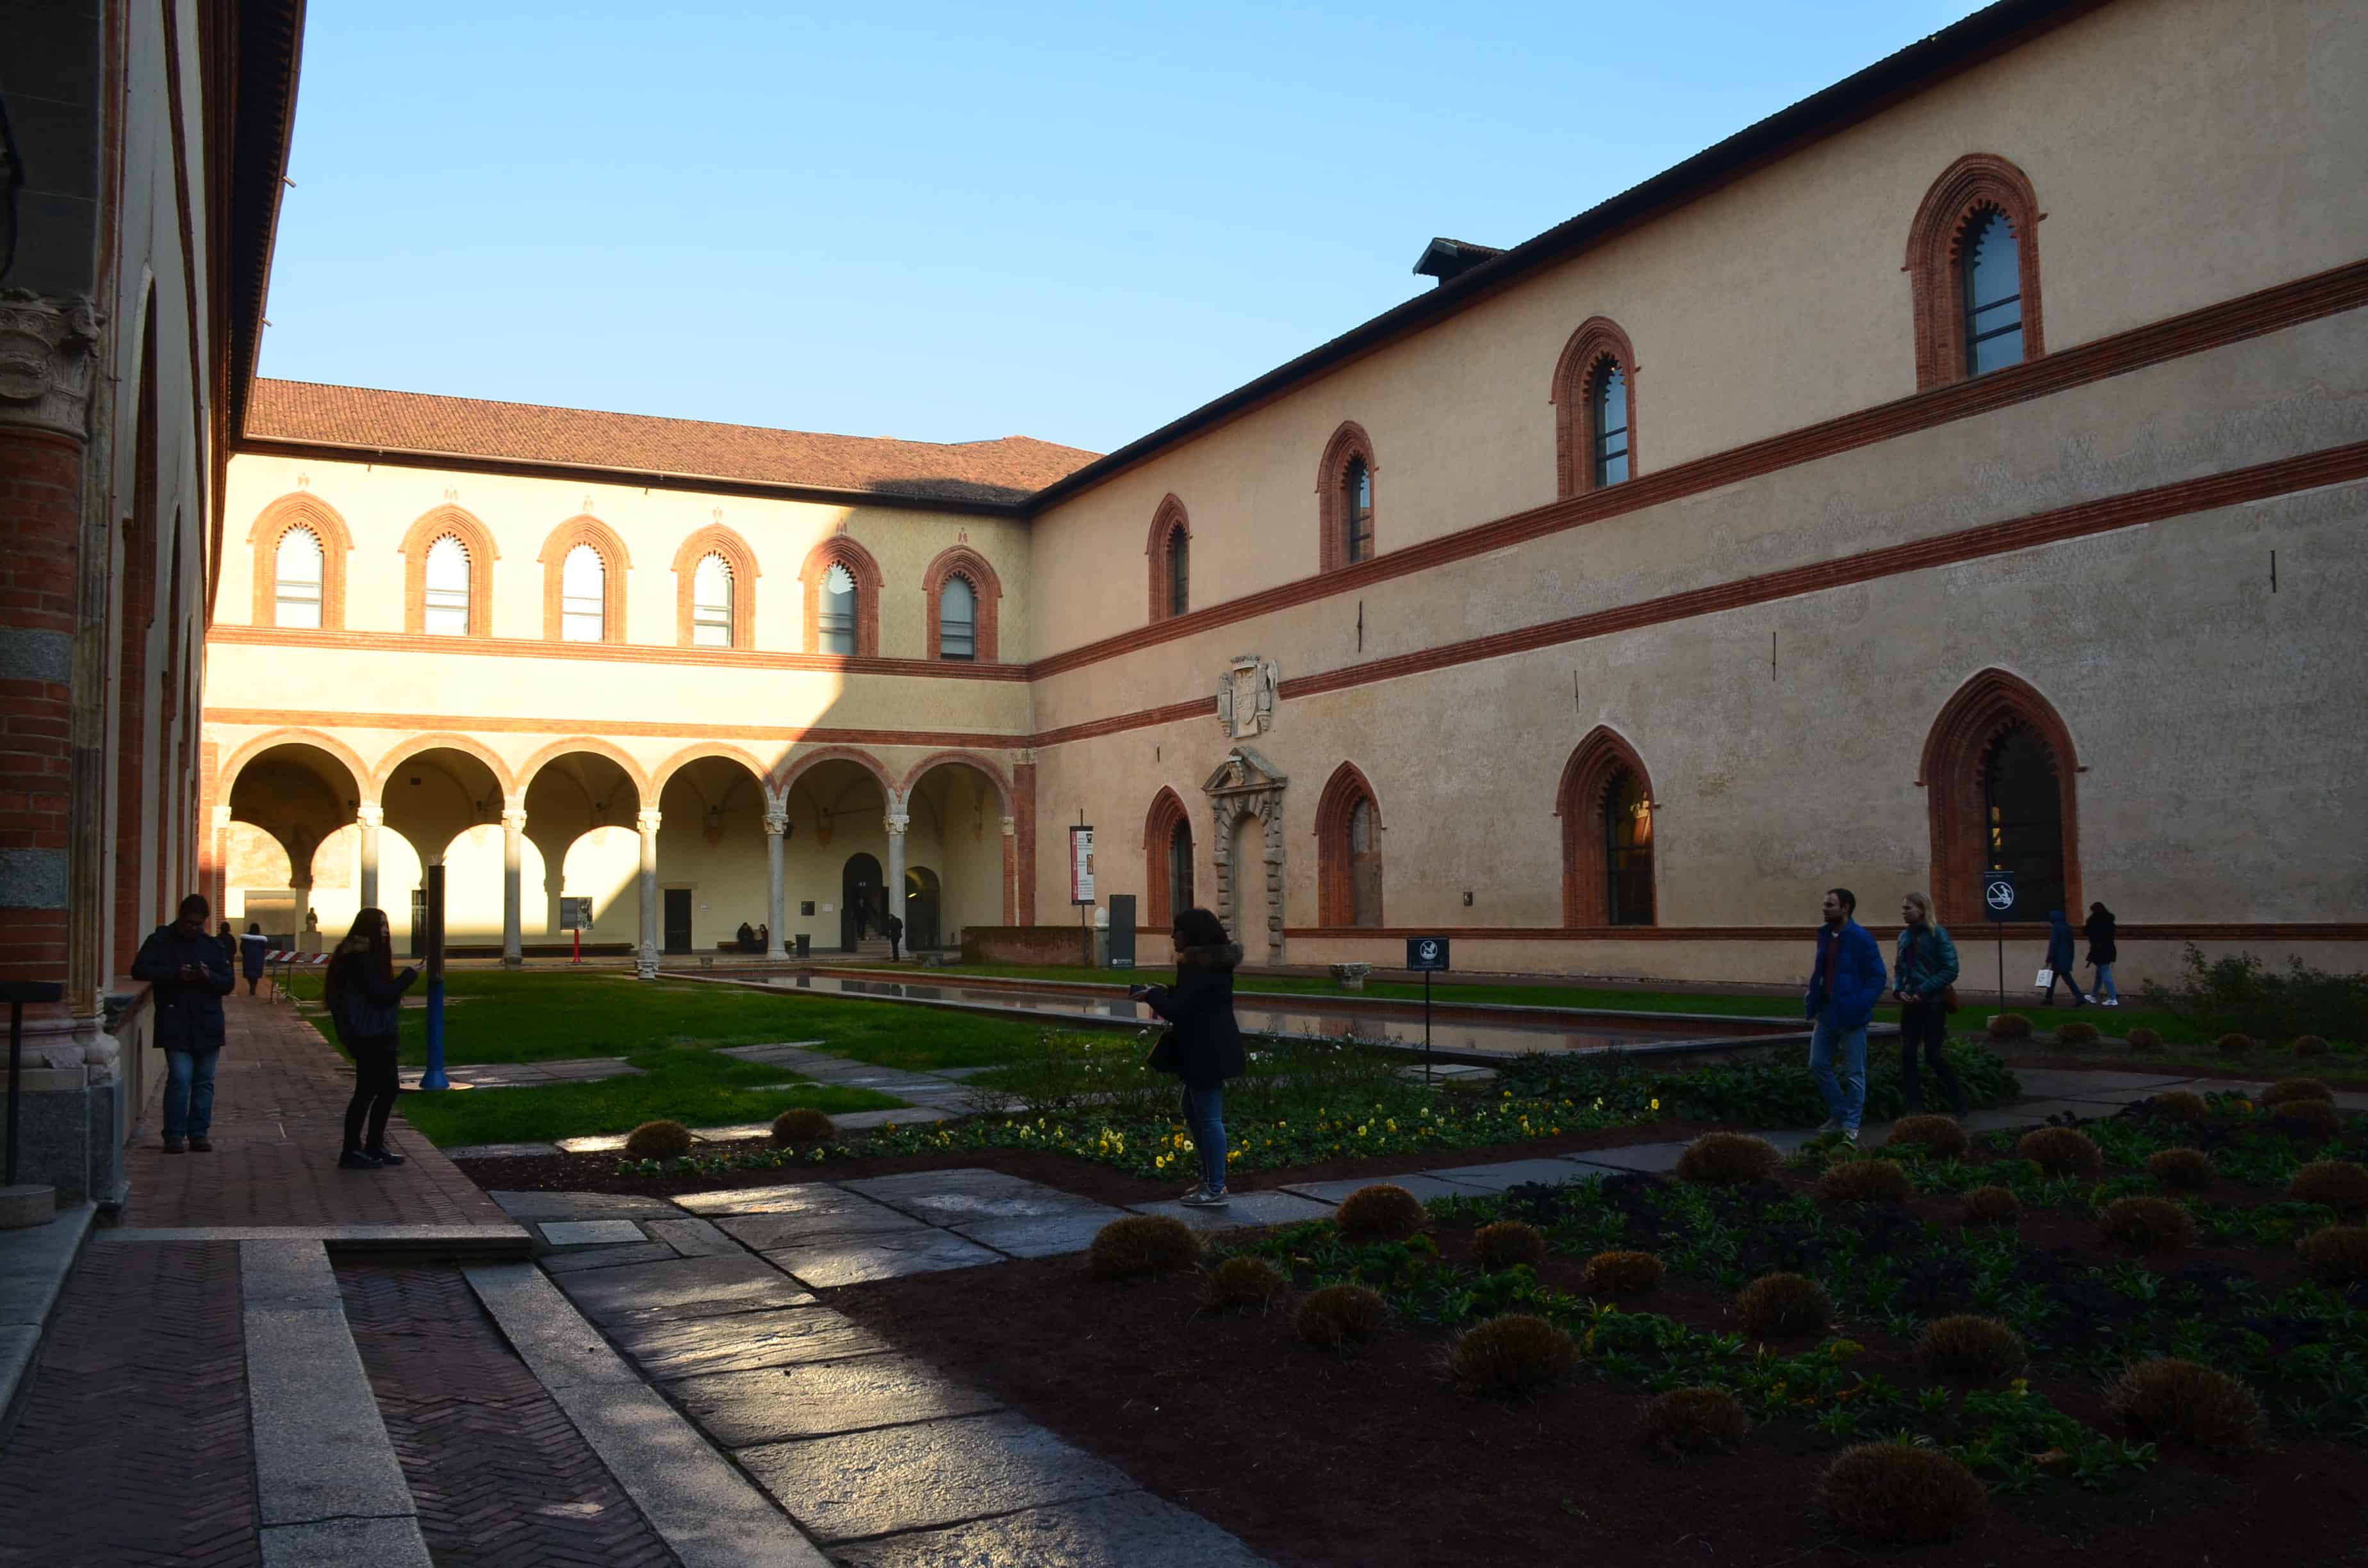 Ducal Court at Sforza Castle in Milan, Italy